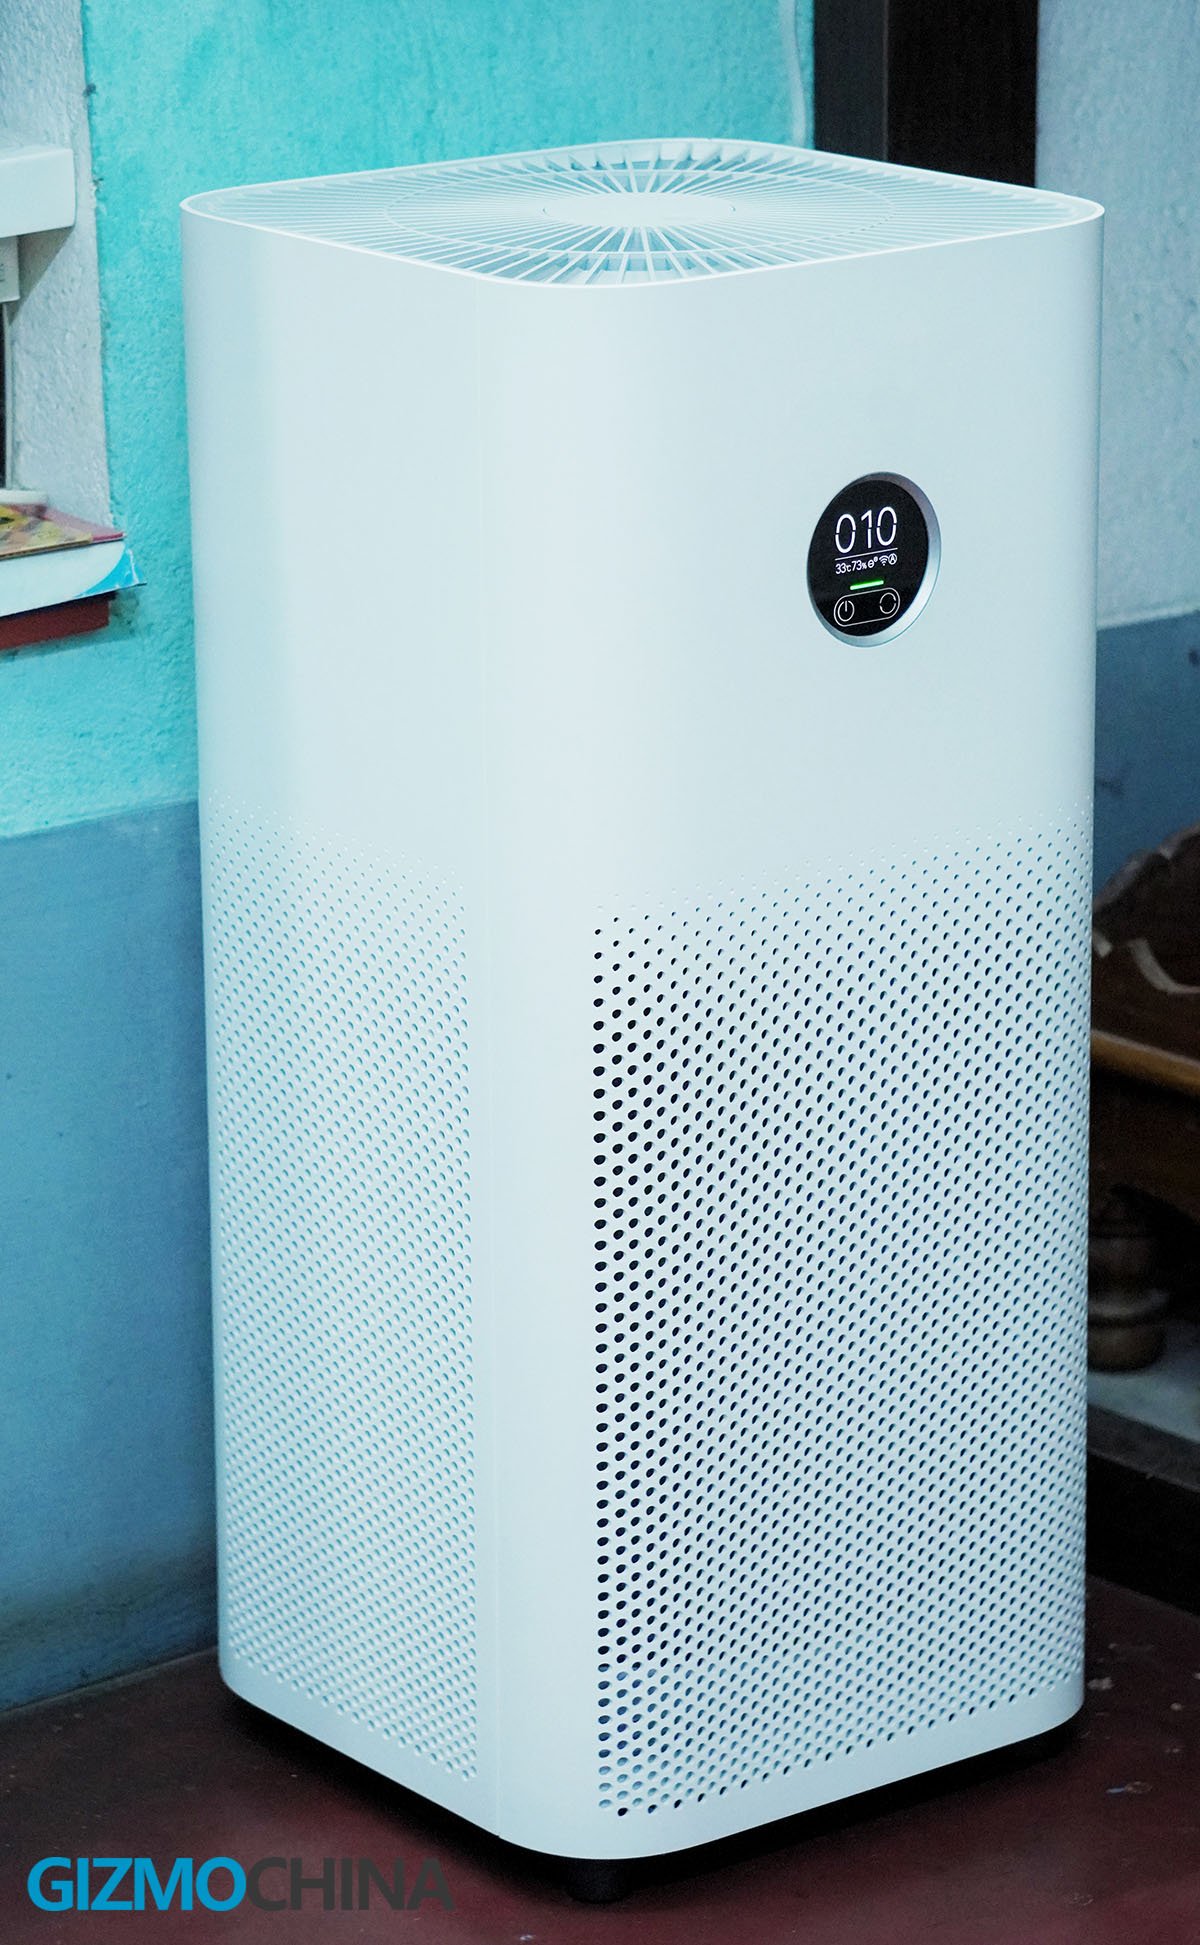 Xiaomi Smart Air Purifier 4 Series Price in Nepal, Specs, Launch